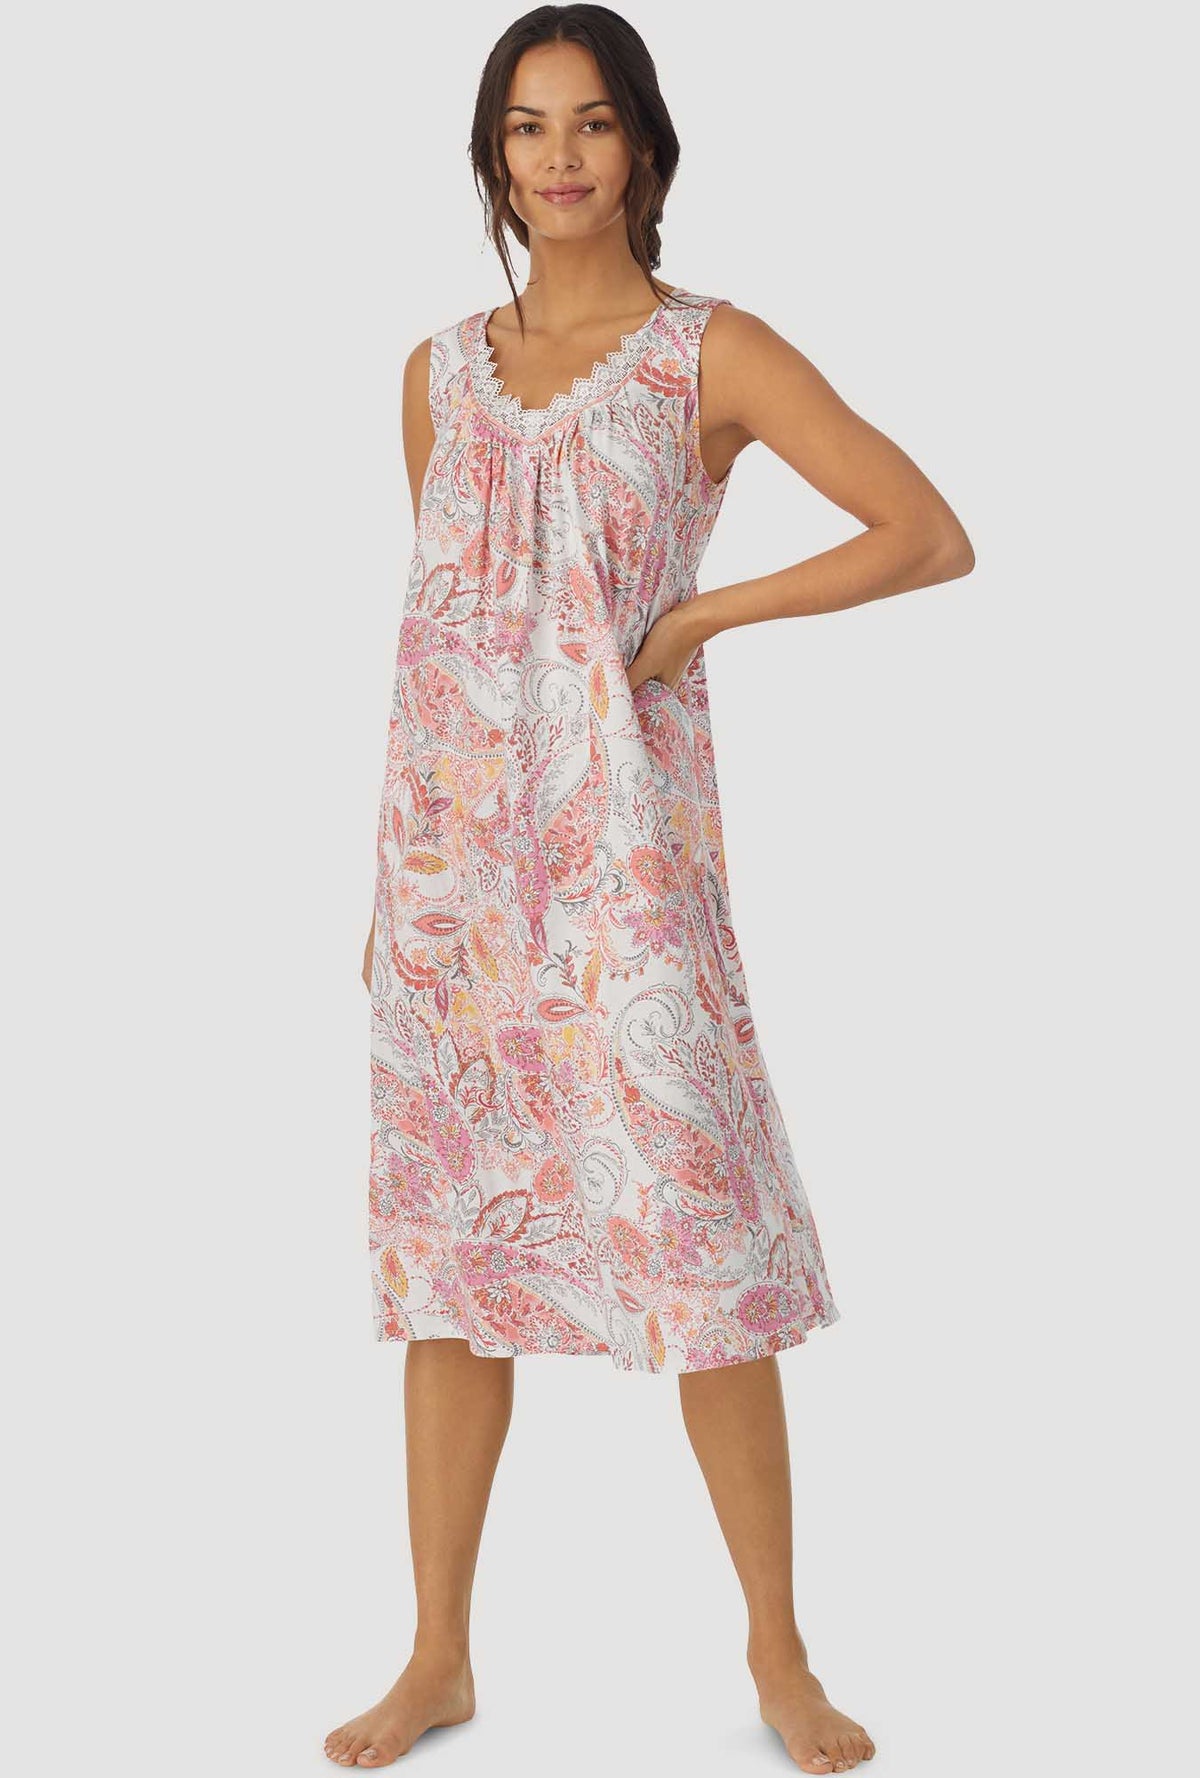 Coral Paisley Sleeveless Ballet Nightgown